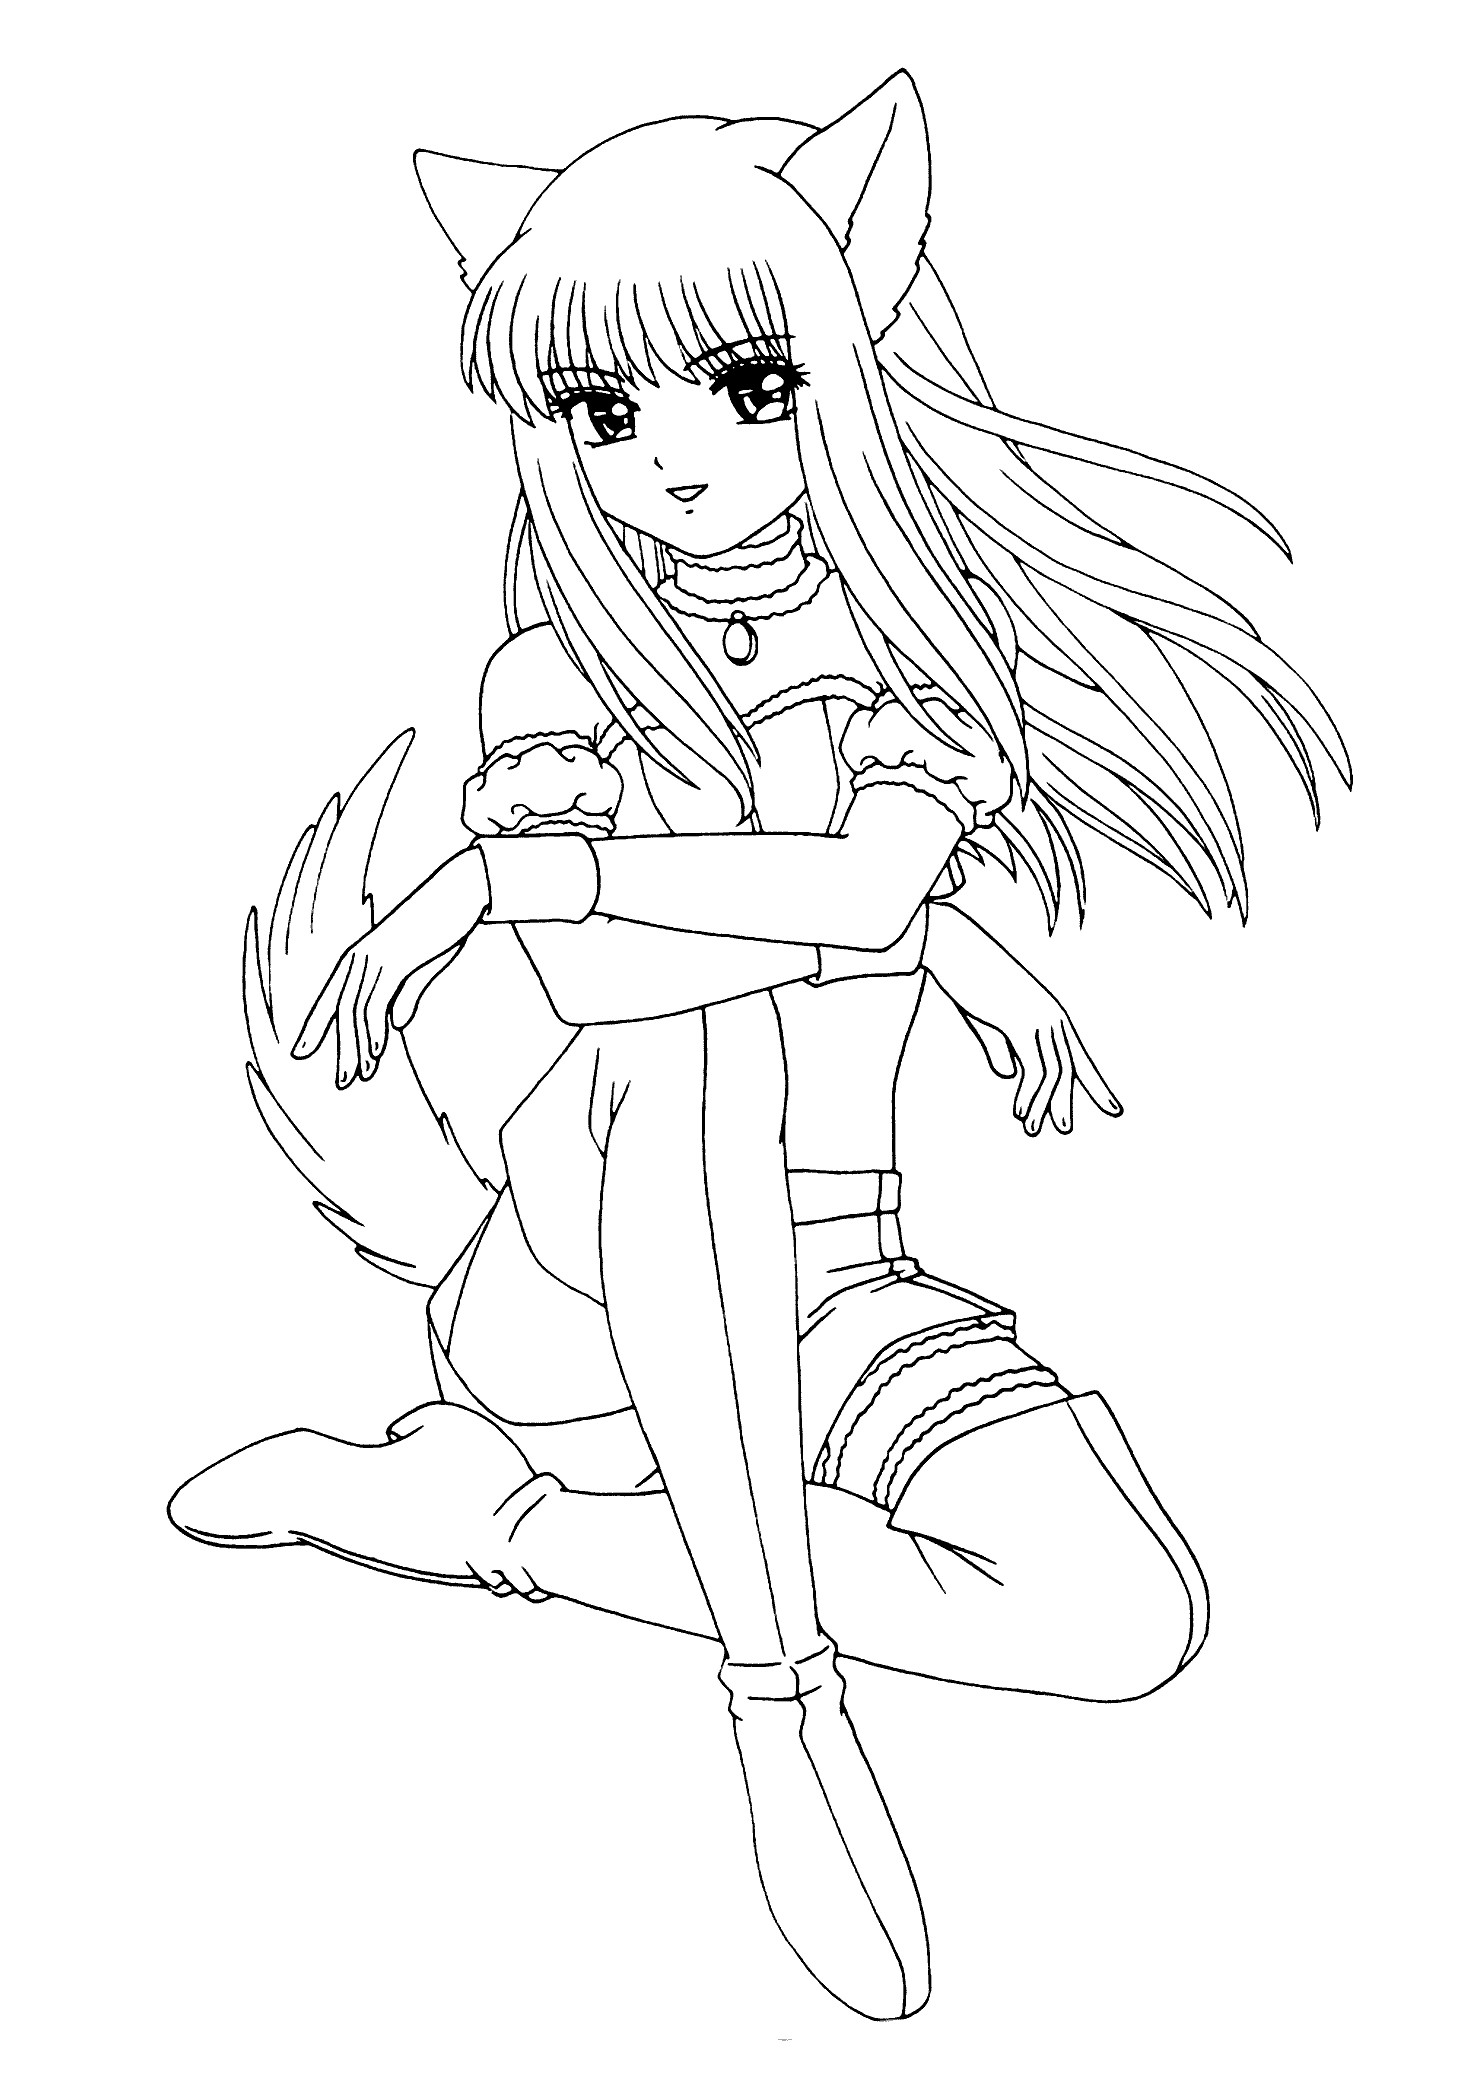 Anime Coloring Pages For Teens
 13 Best of Anime Girl Coloring Pages Bestofcoloring